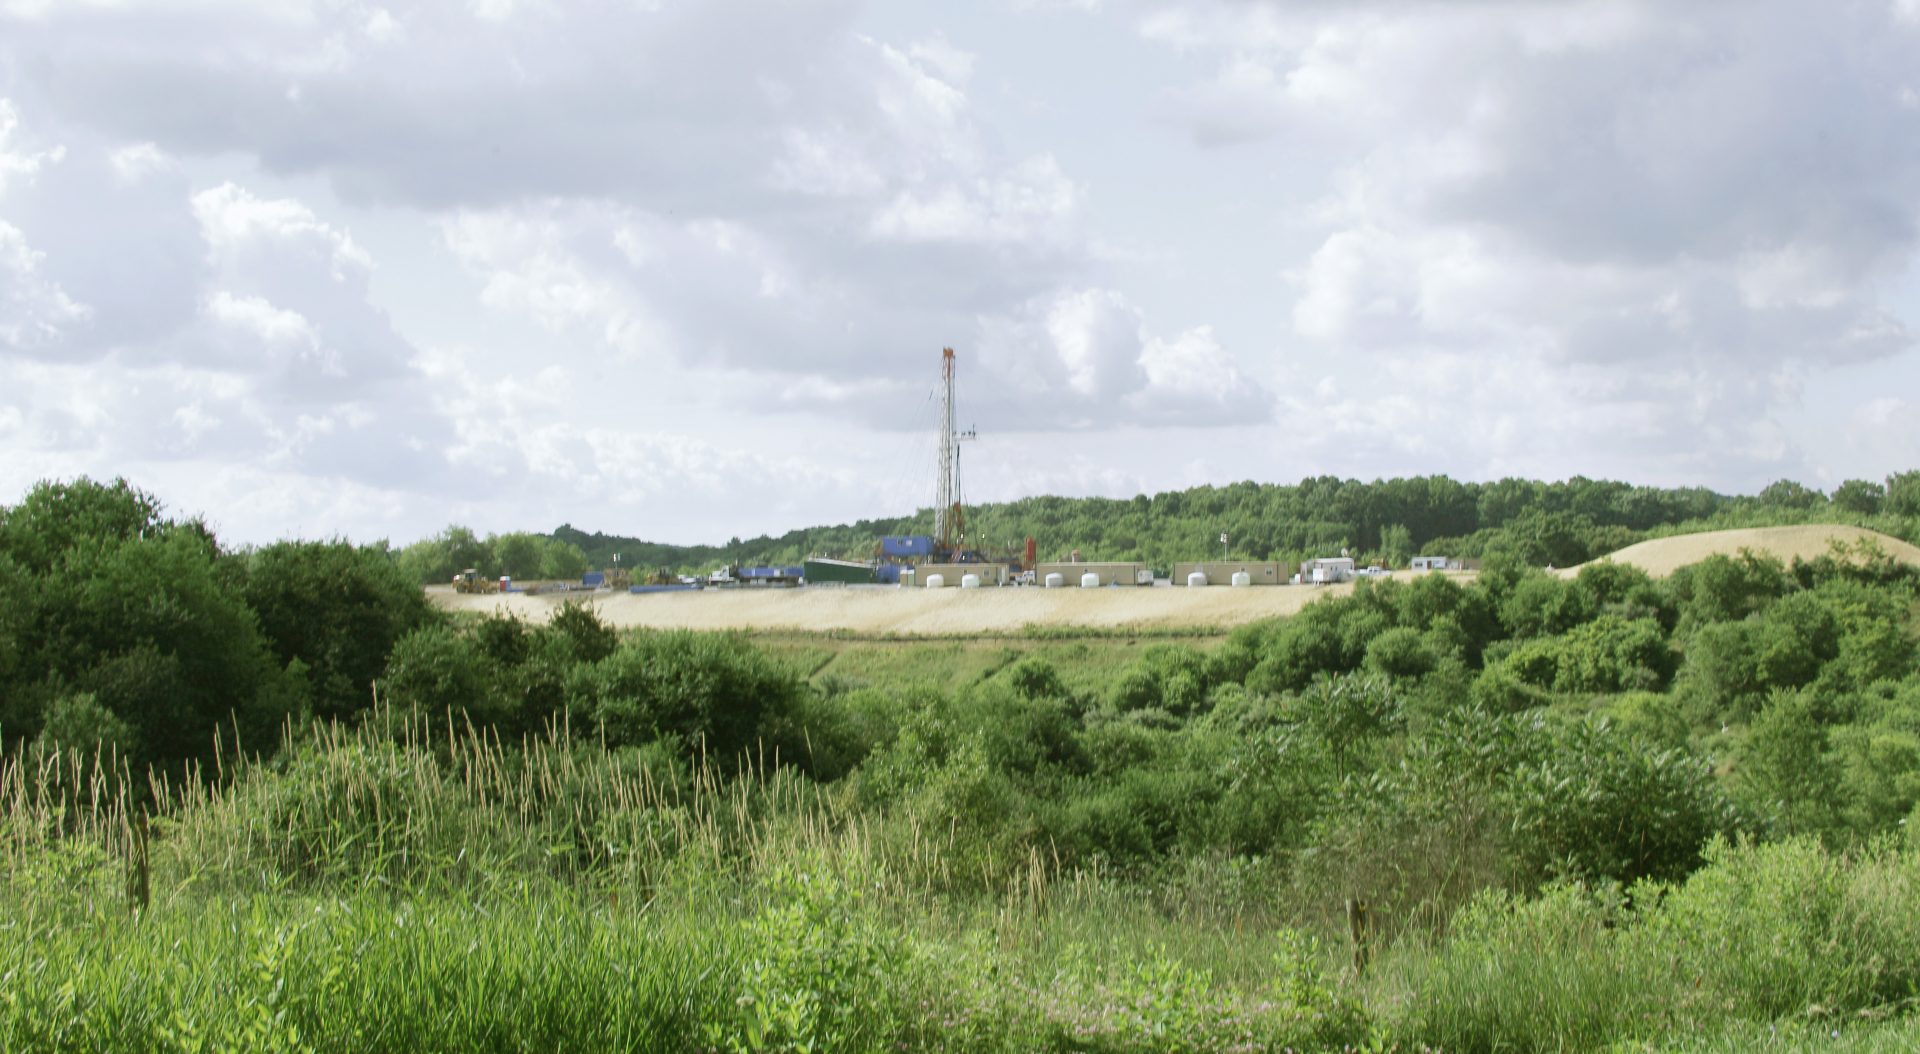 A crew works on a drilling rig at a well site for shale based natural gas on Monday, June 25, 2012 in Zelienople, Pa.